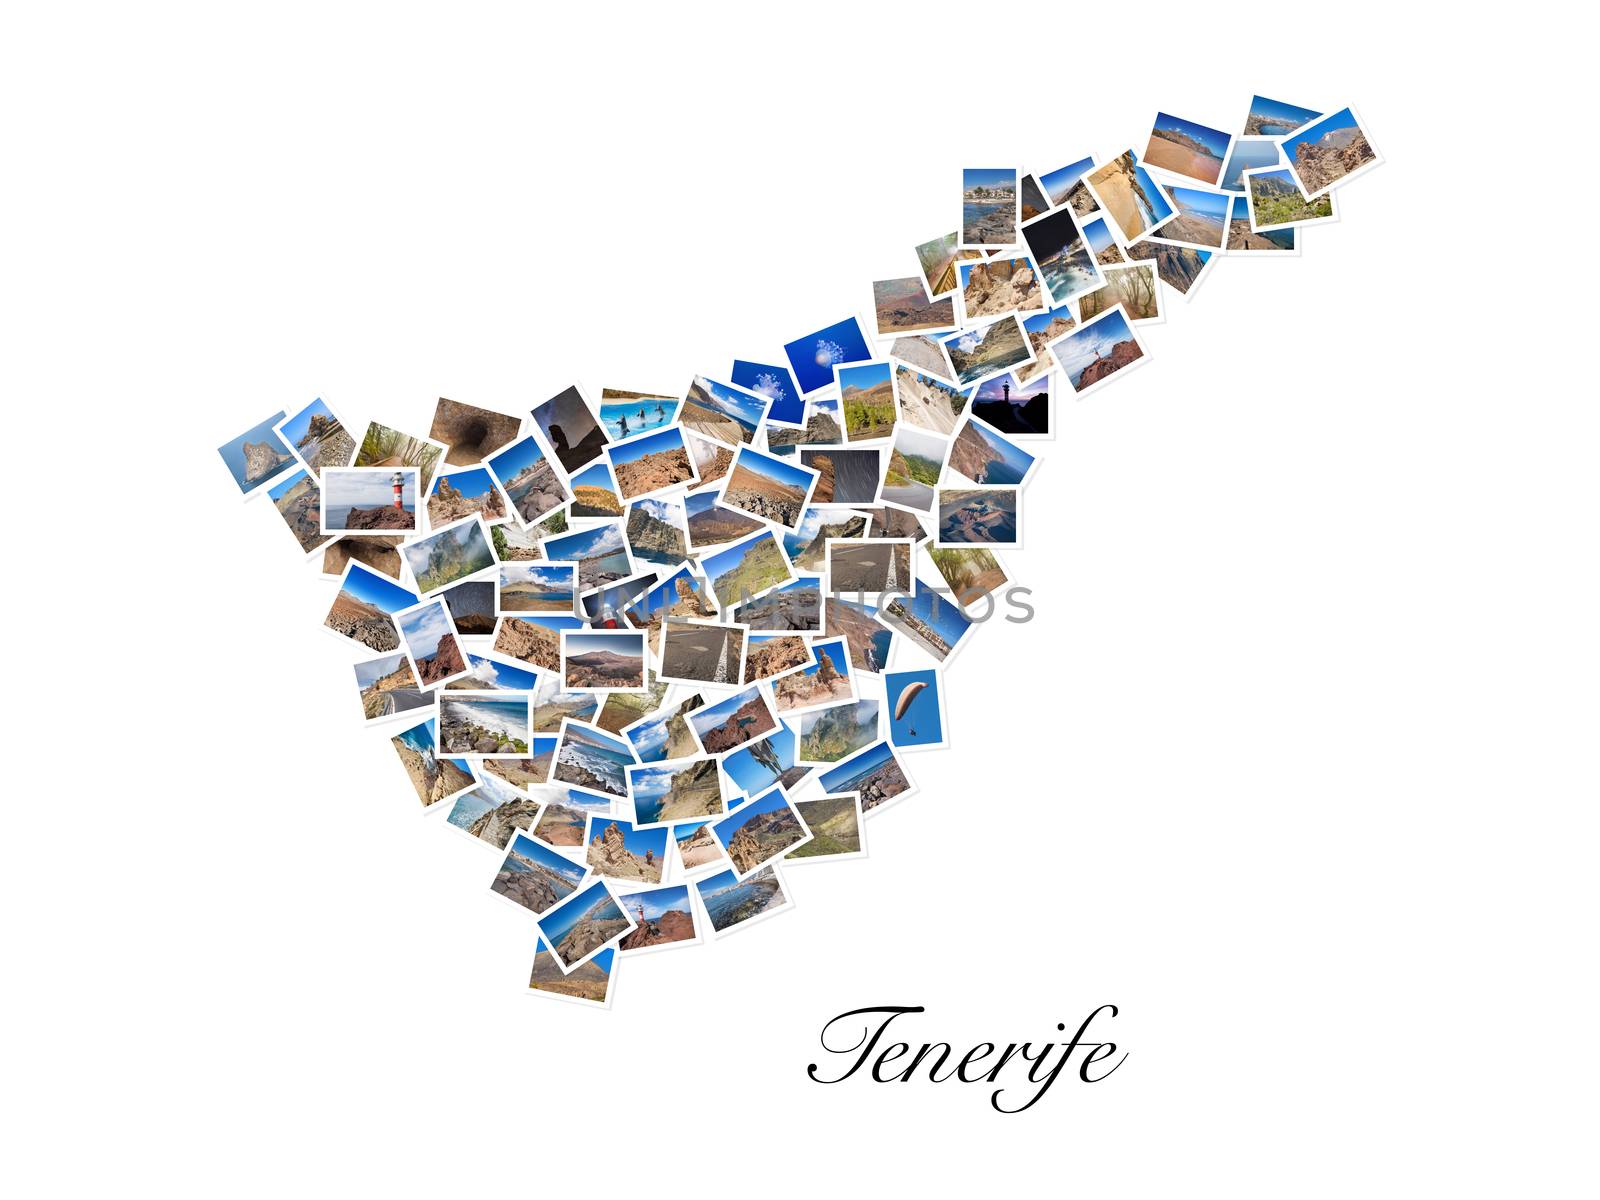 A collage of my best travel photos of Tenerife, forming the shape of Tenerife island, version 3. by HERRAEZ